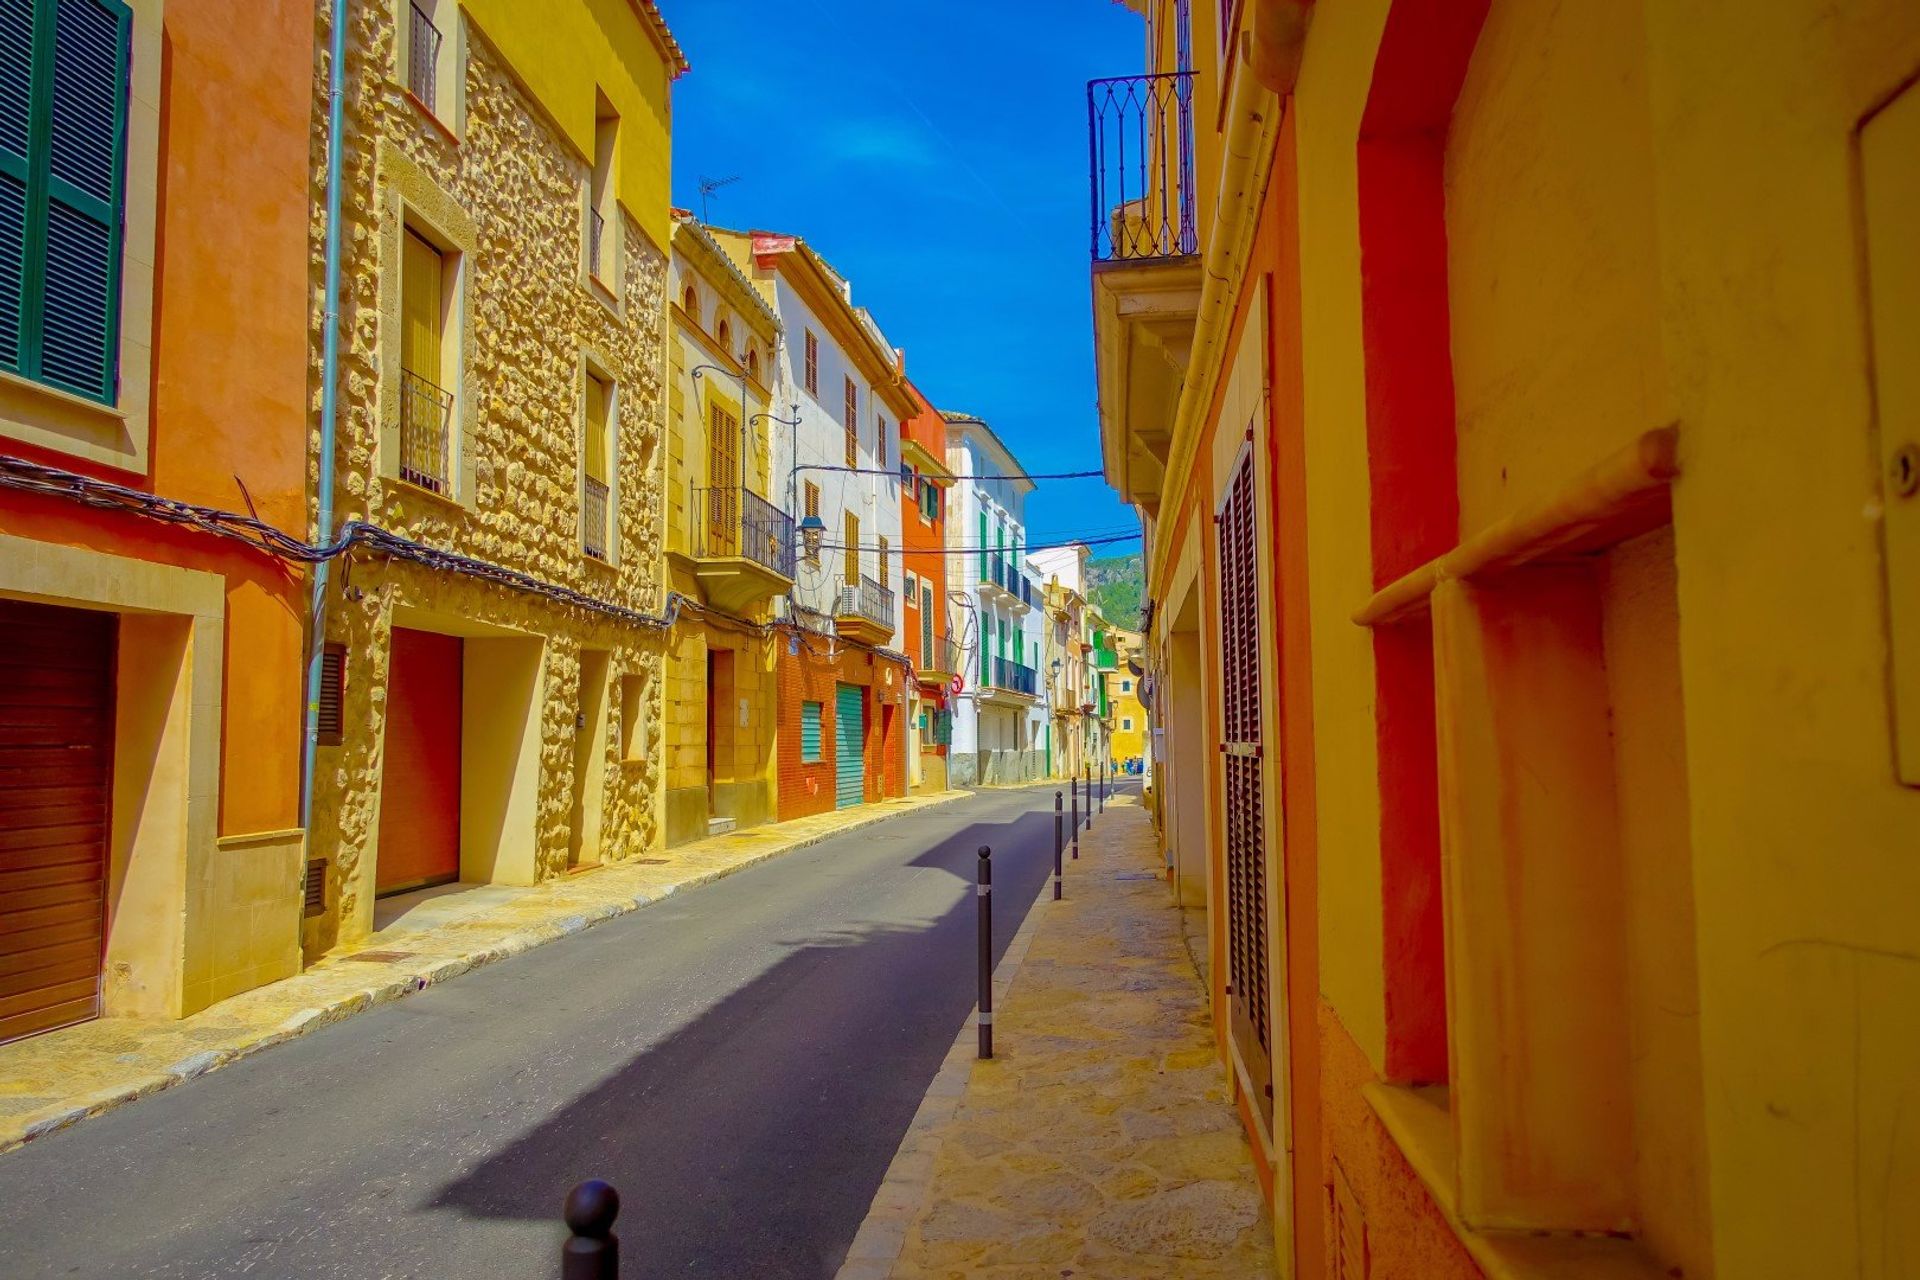 The colourful back streets of Andratx